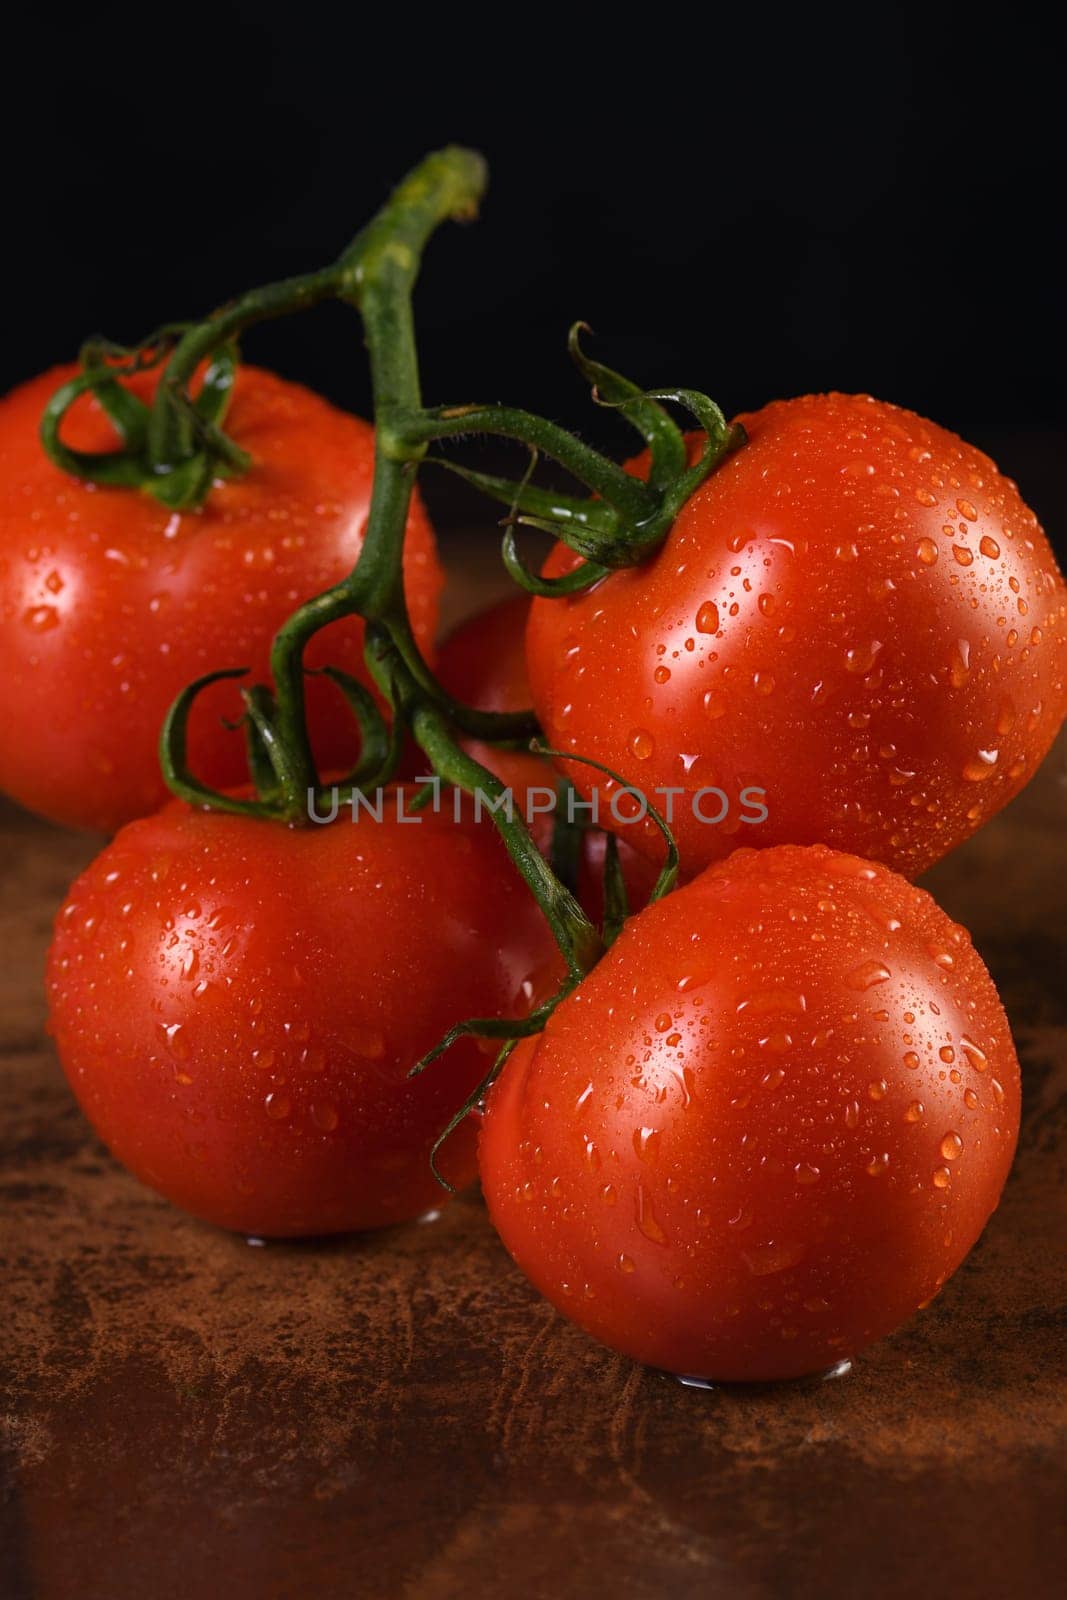 Fresh ripe red tomato branch on a rusty, redhead table with water drops. Dark background. Close-up. Vertical photo. Poster for vegetable market or shop.